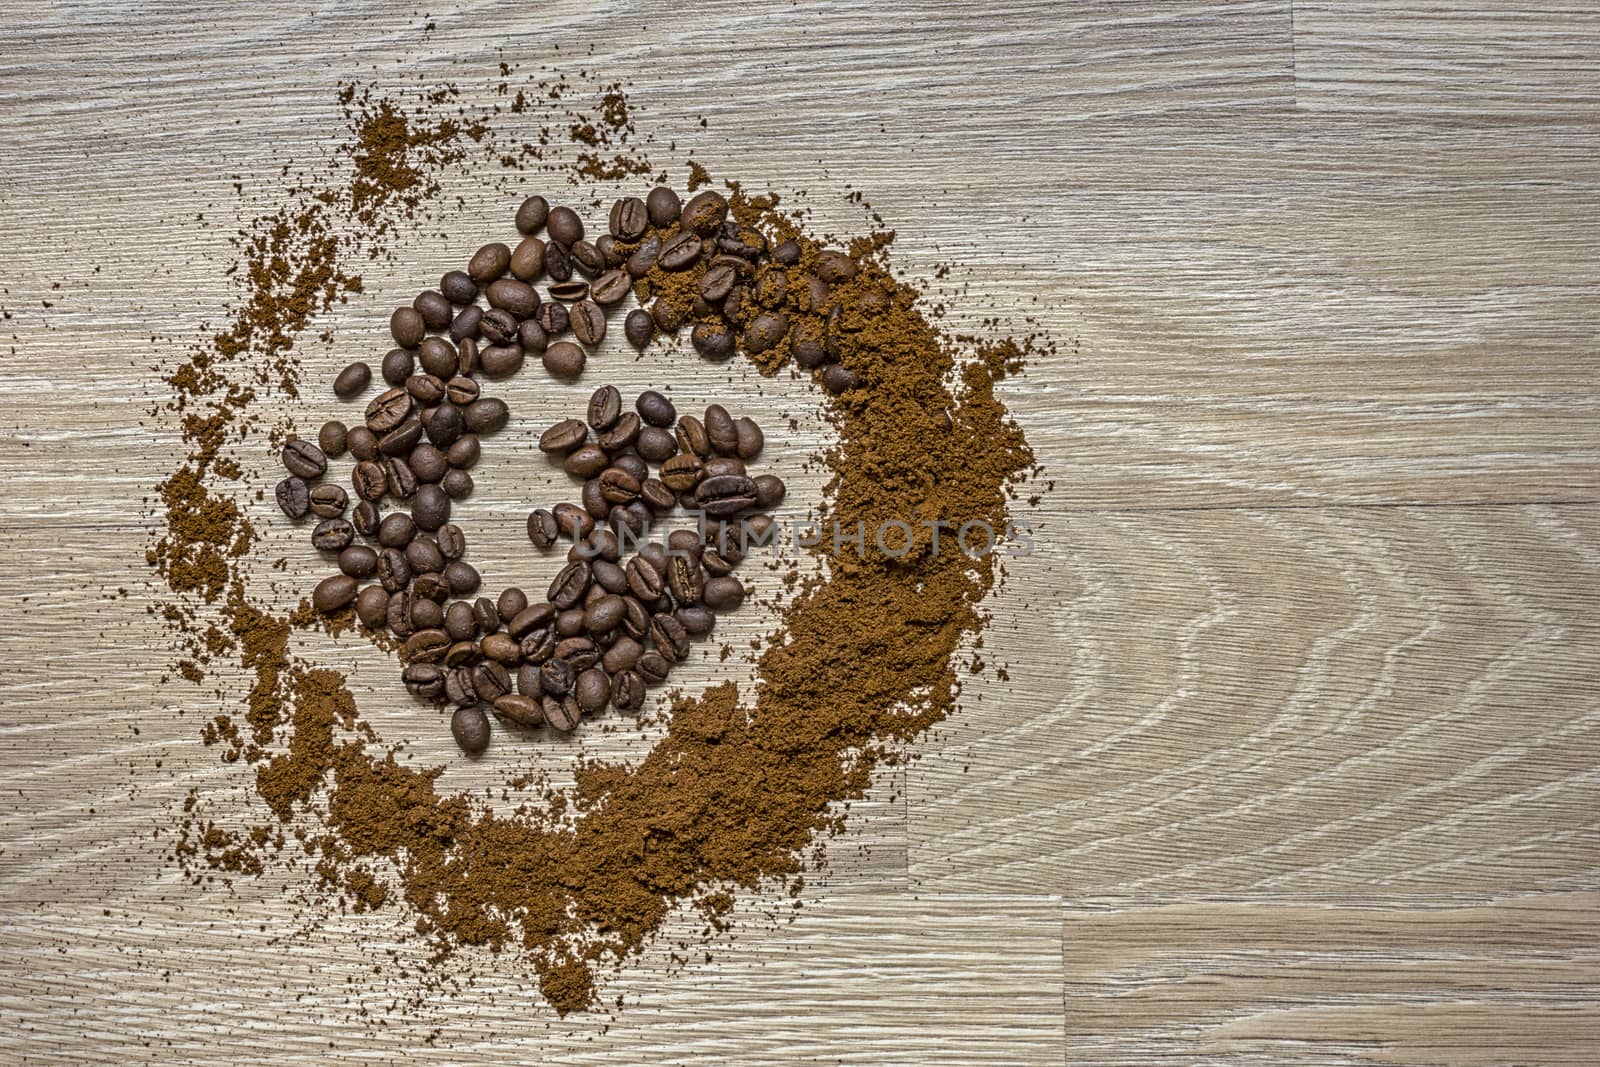 Coffee beans and ground coffee on a wooden table like a spiral.  Vintage style concept